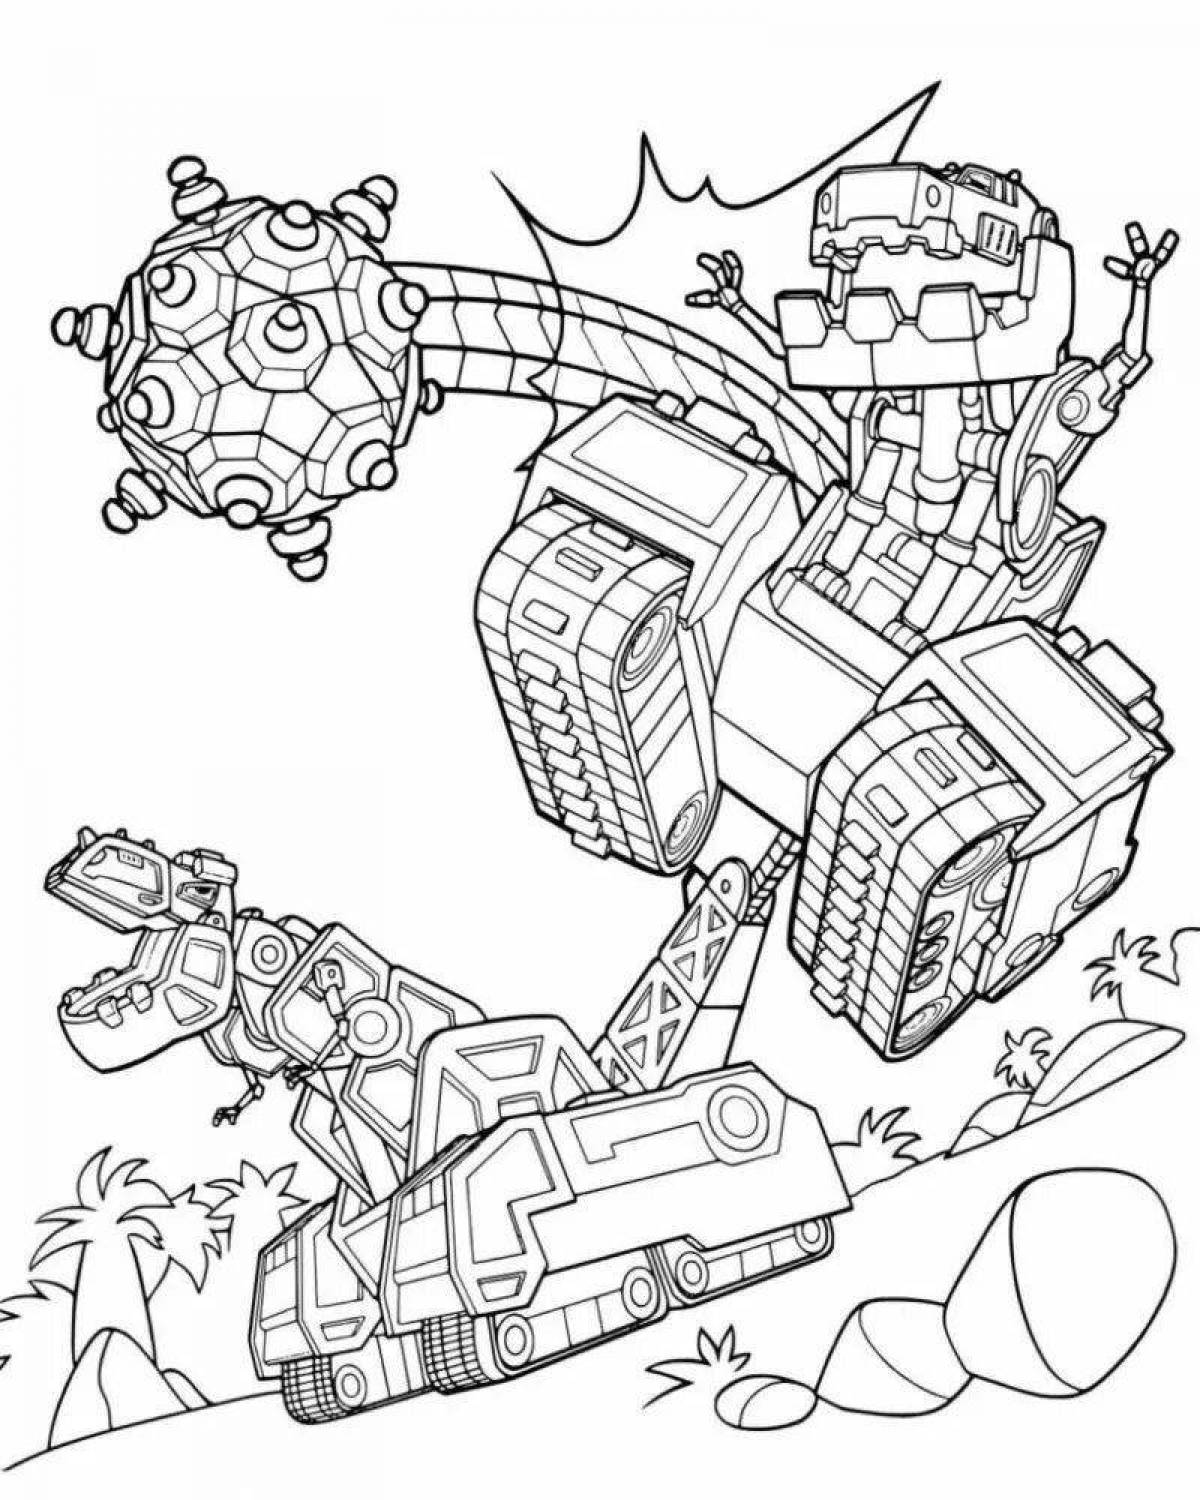 Exciting screamer coloring pages for boys